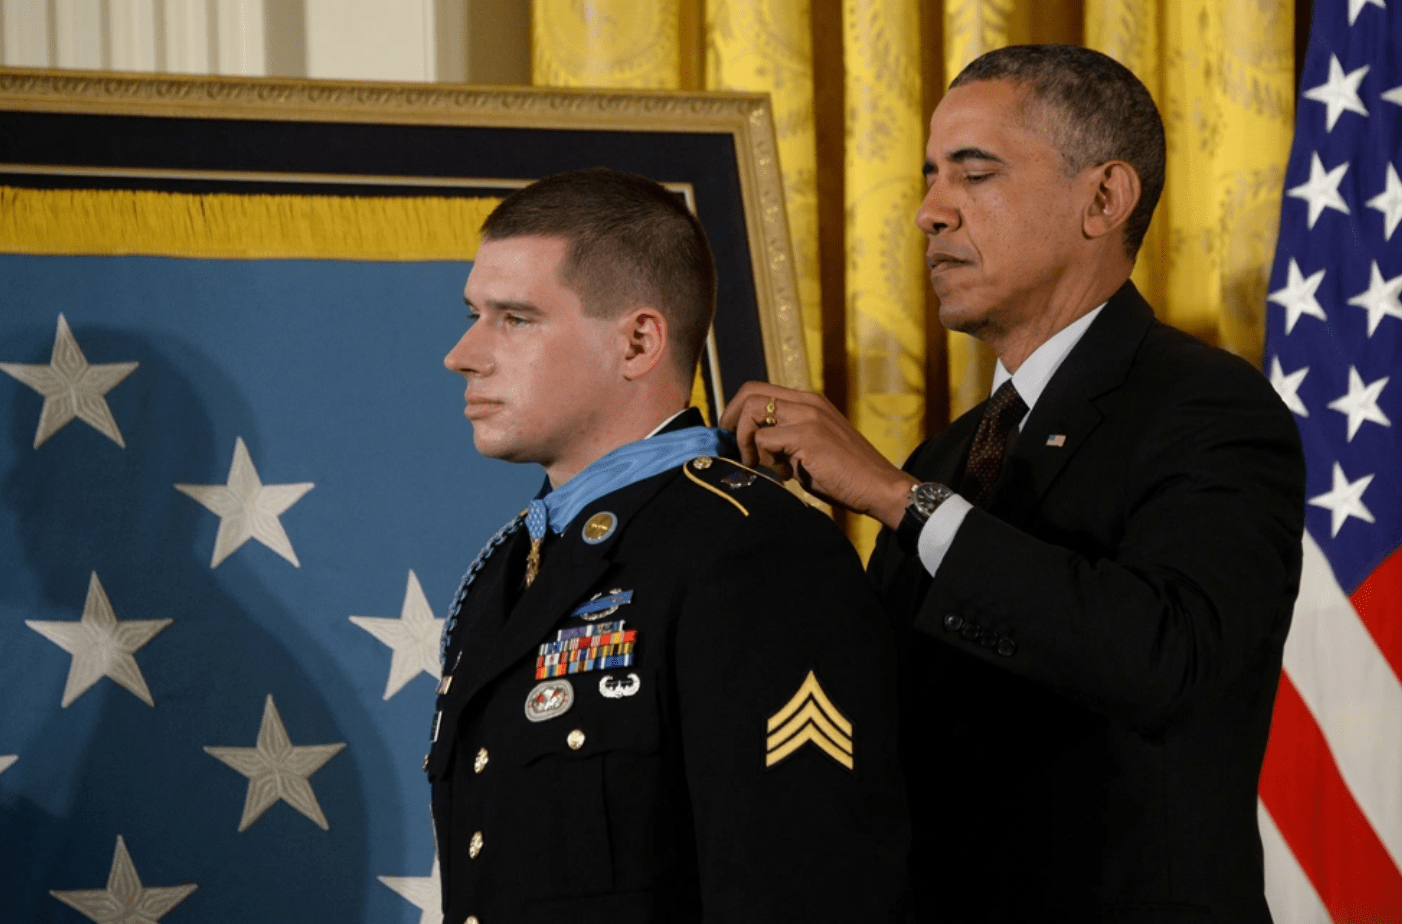 President Barack Obama presents the Medal of Honor to former U.S. Army Sgt. Kyle White at the White House in Washington, May 13, 2014. White was recognized for his actions during his deployment to Afghanistan in 2007 while serving with Chosen Company, 2nd Battalion (Airborne), 503rd Infantry Regiment, 173rd Airborne Brigade. (U.S. Army Photo by Sgt. Laura Buchta/Released)